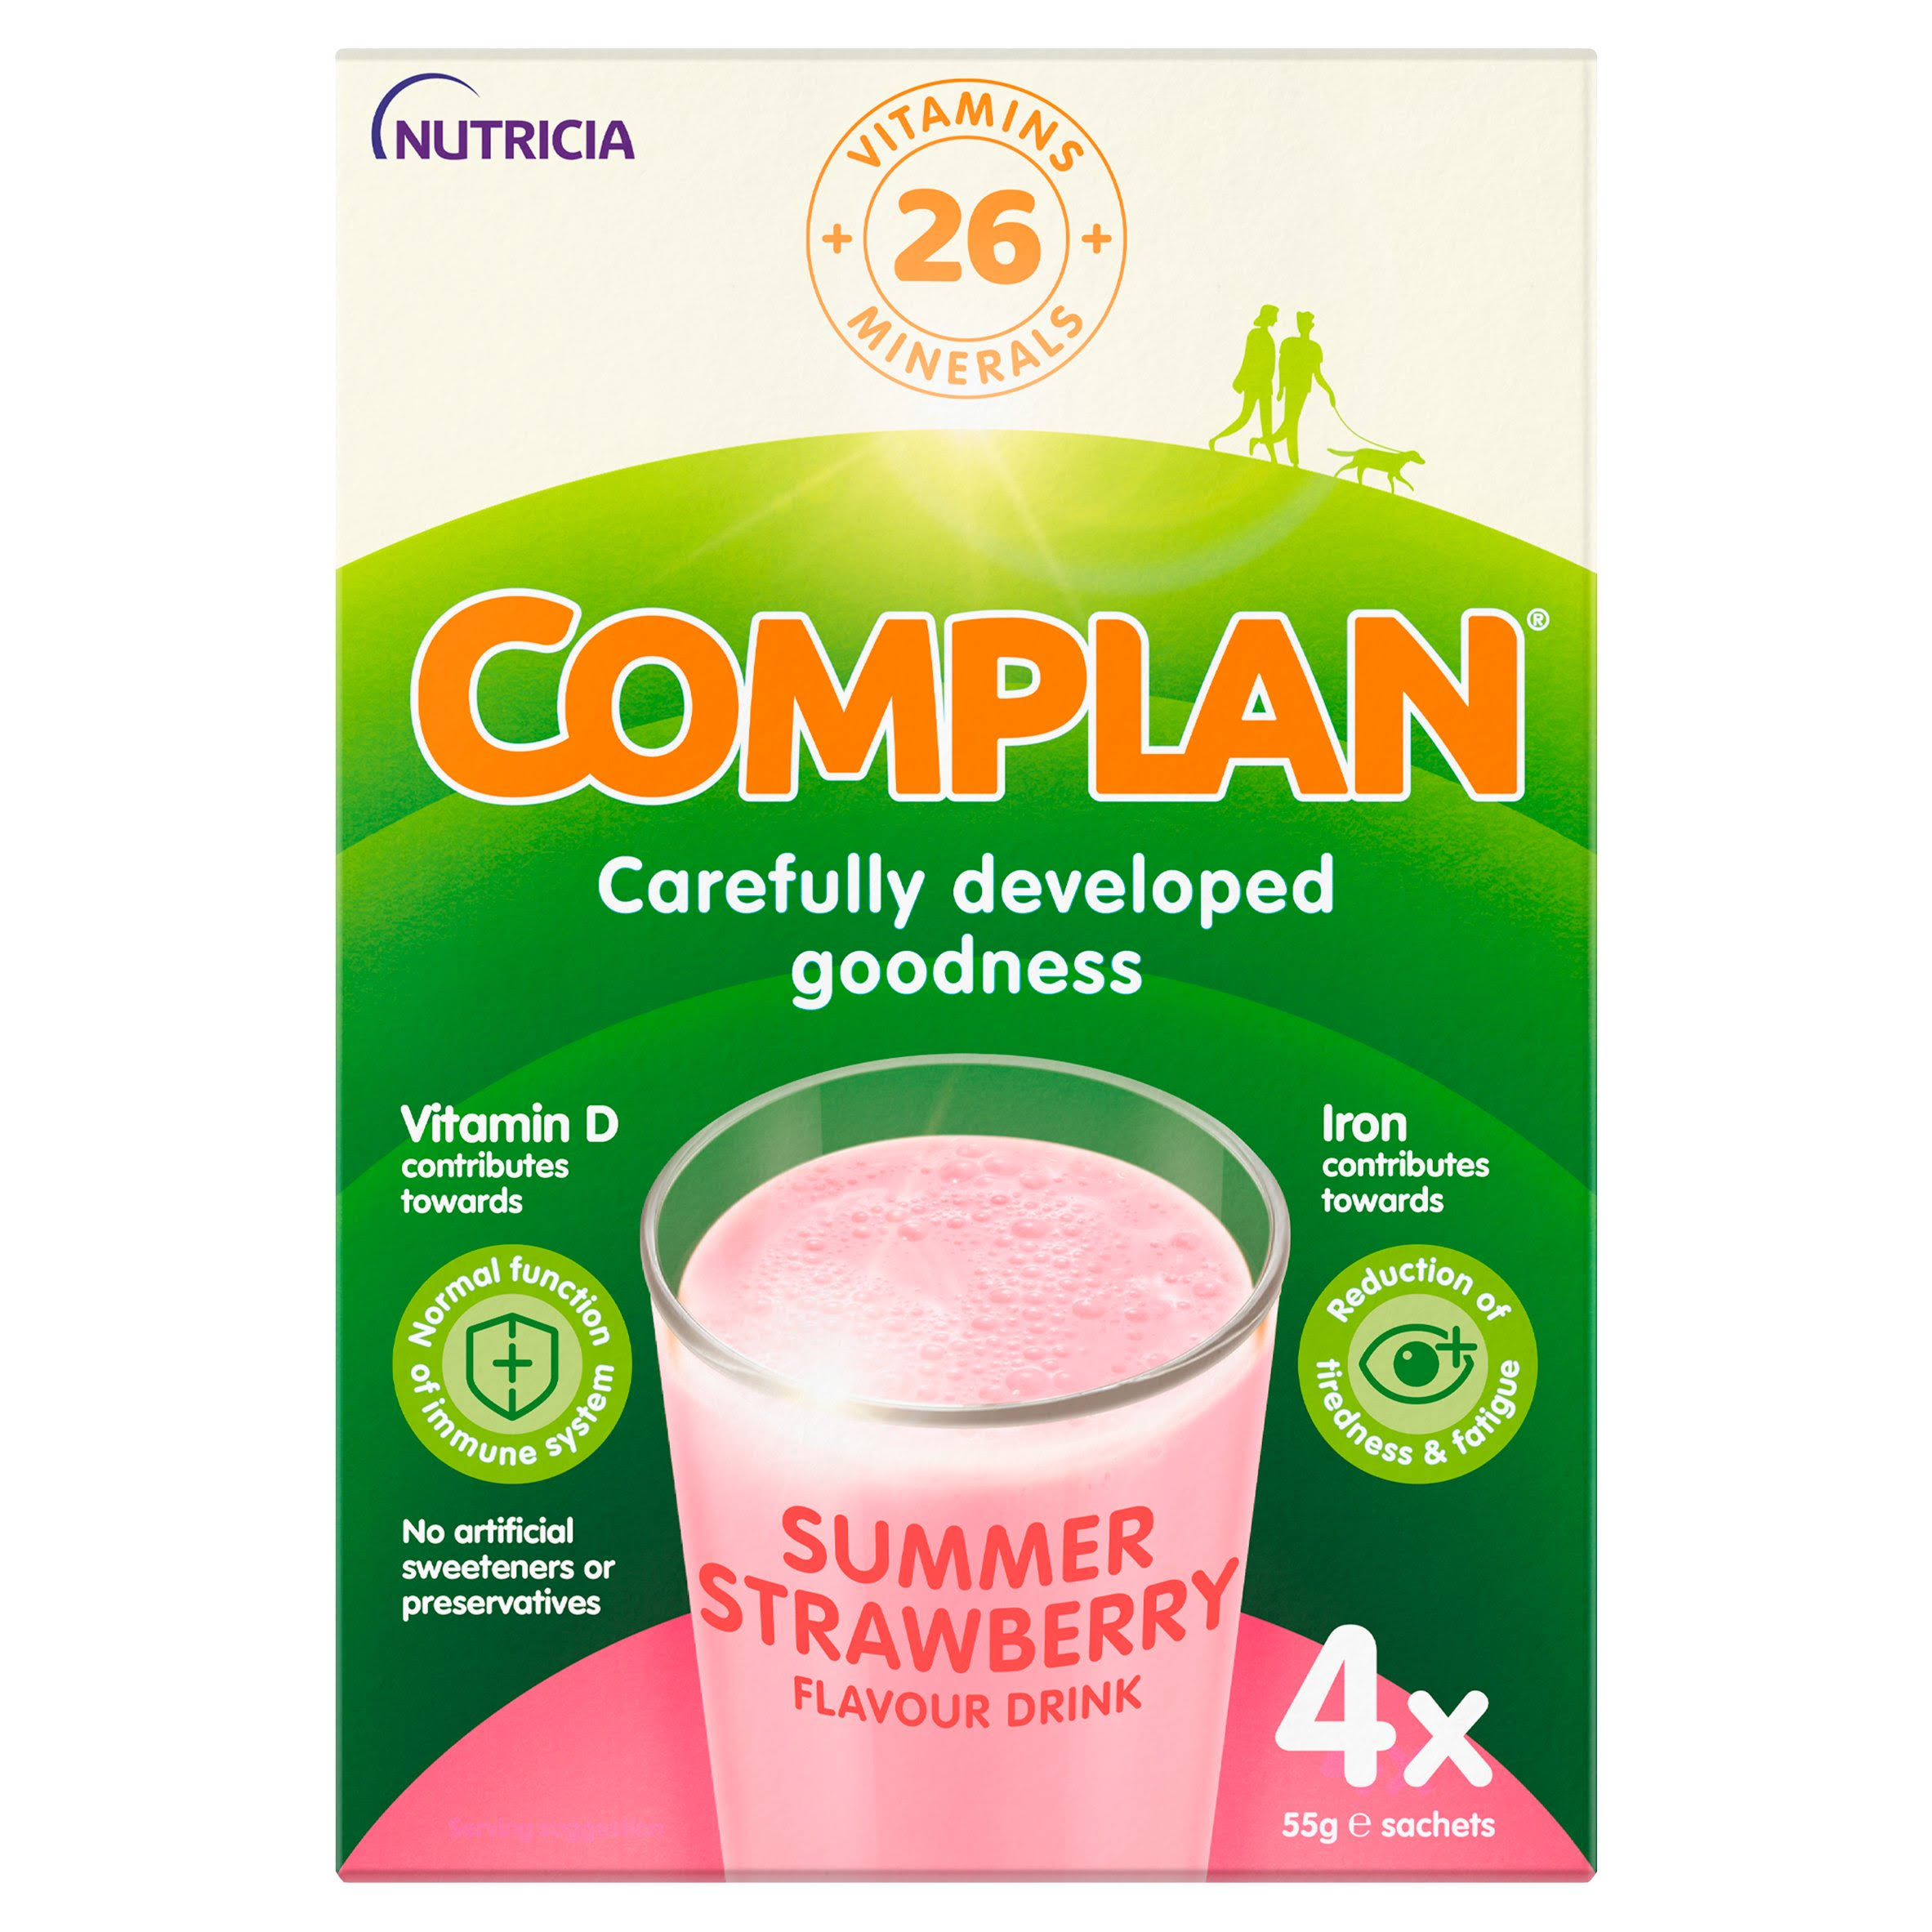 Complan Nutritious Vitamin Rich Drink - Summer Strawberry, 55g, 4 Count